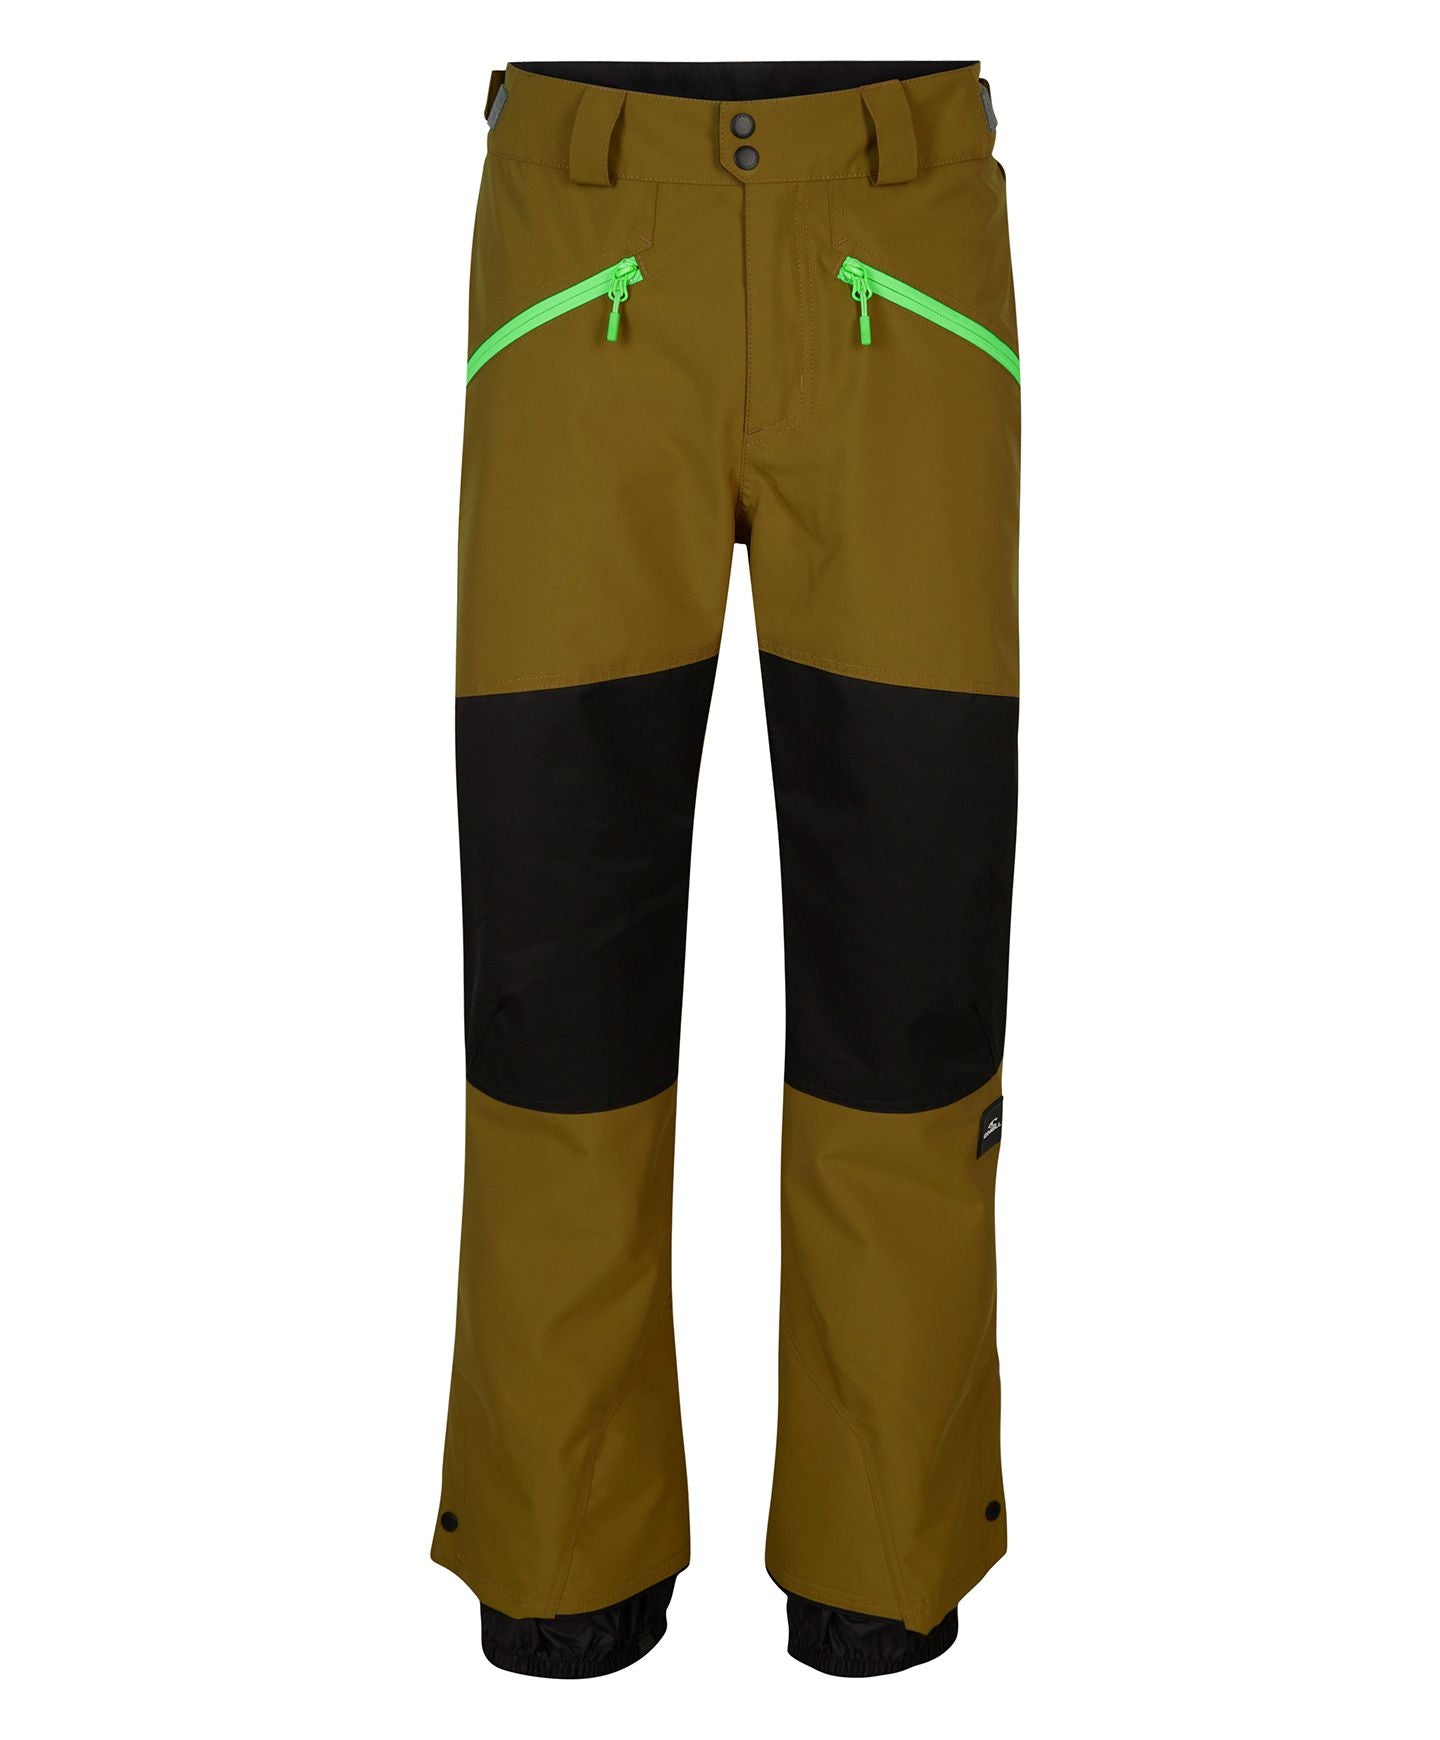 Buy Mens Jacksaw Snow Pants - Plantation Colour Block by ONeill online